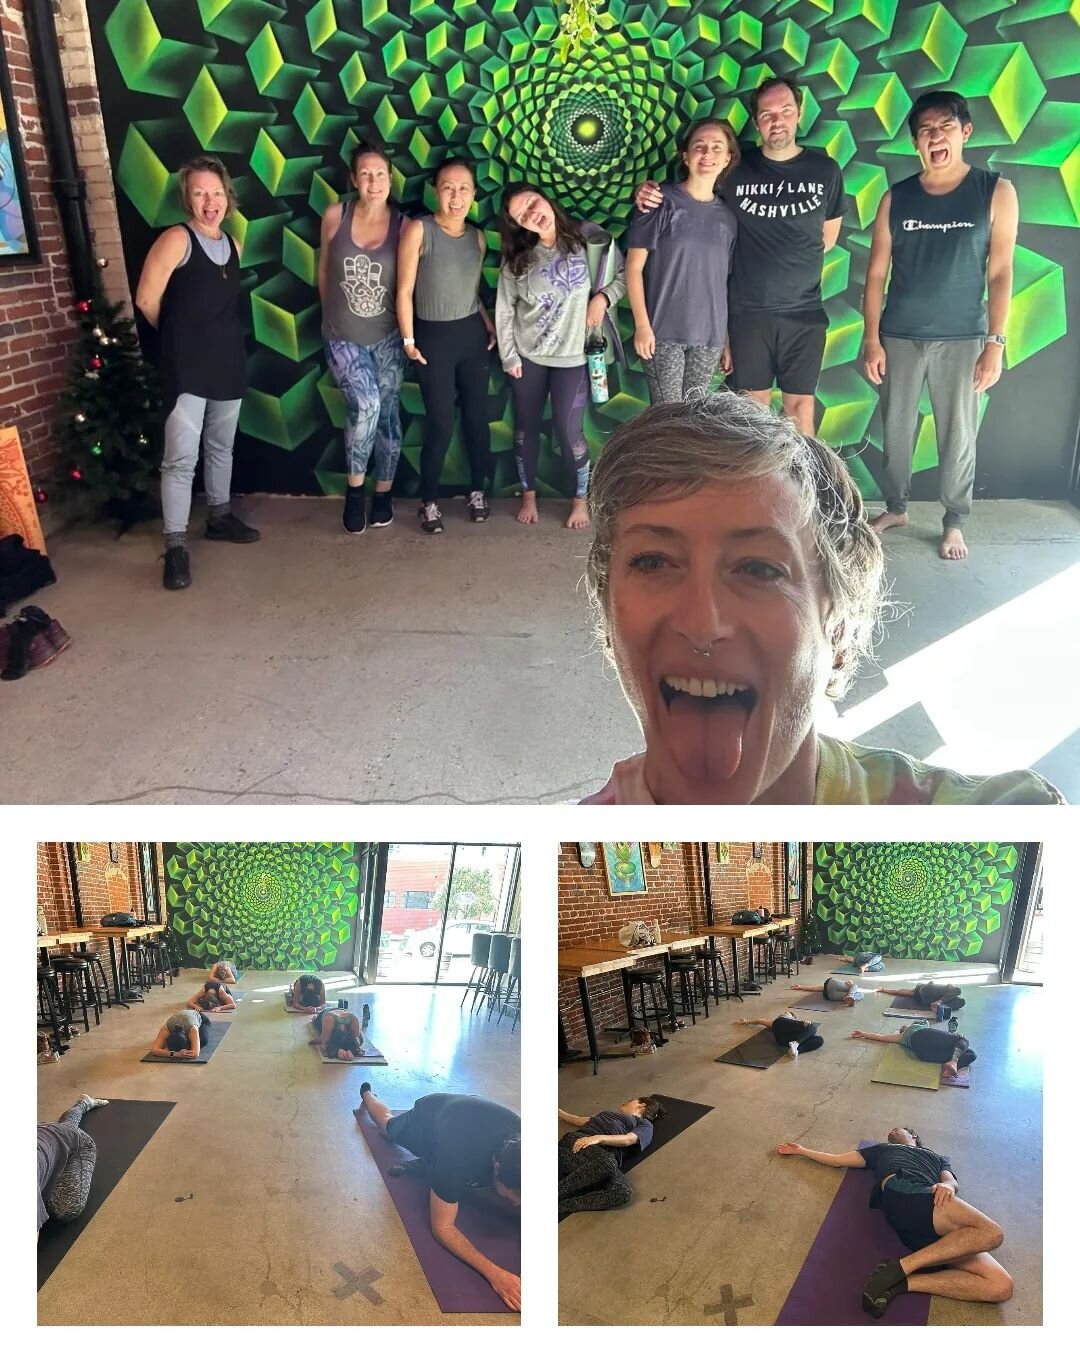 This was our first Yoga For Runners class of 2023. We'll go again in February and March so don't fret about missing out.

This Saturday is Heavy Metal Yoga.

The link is in bio.